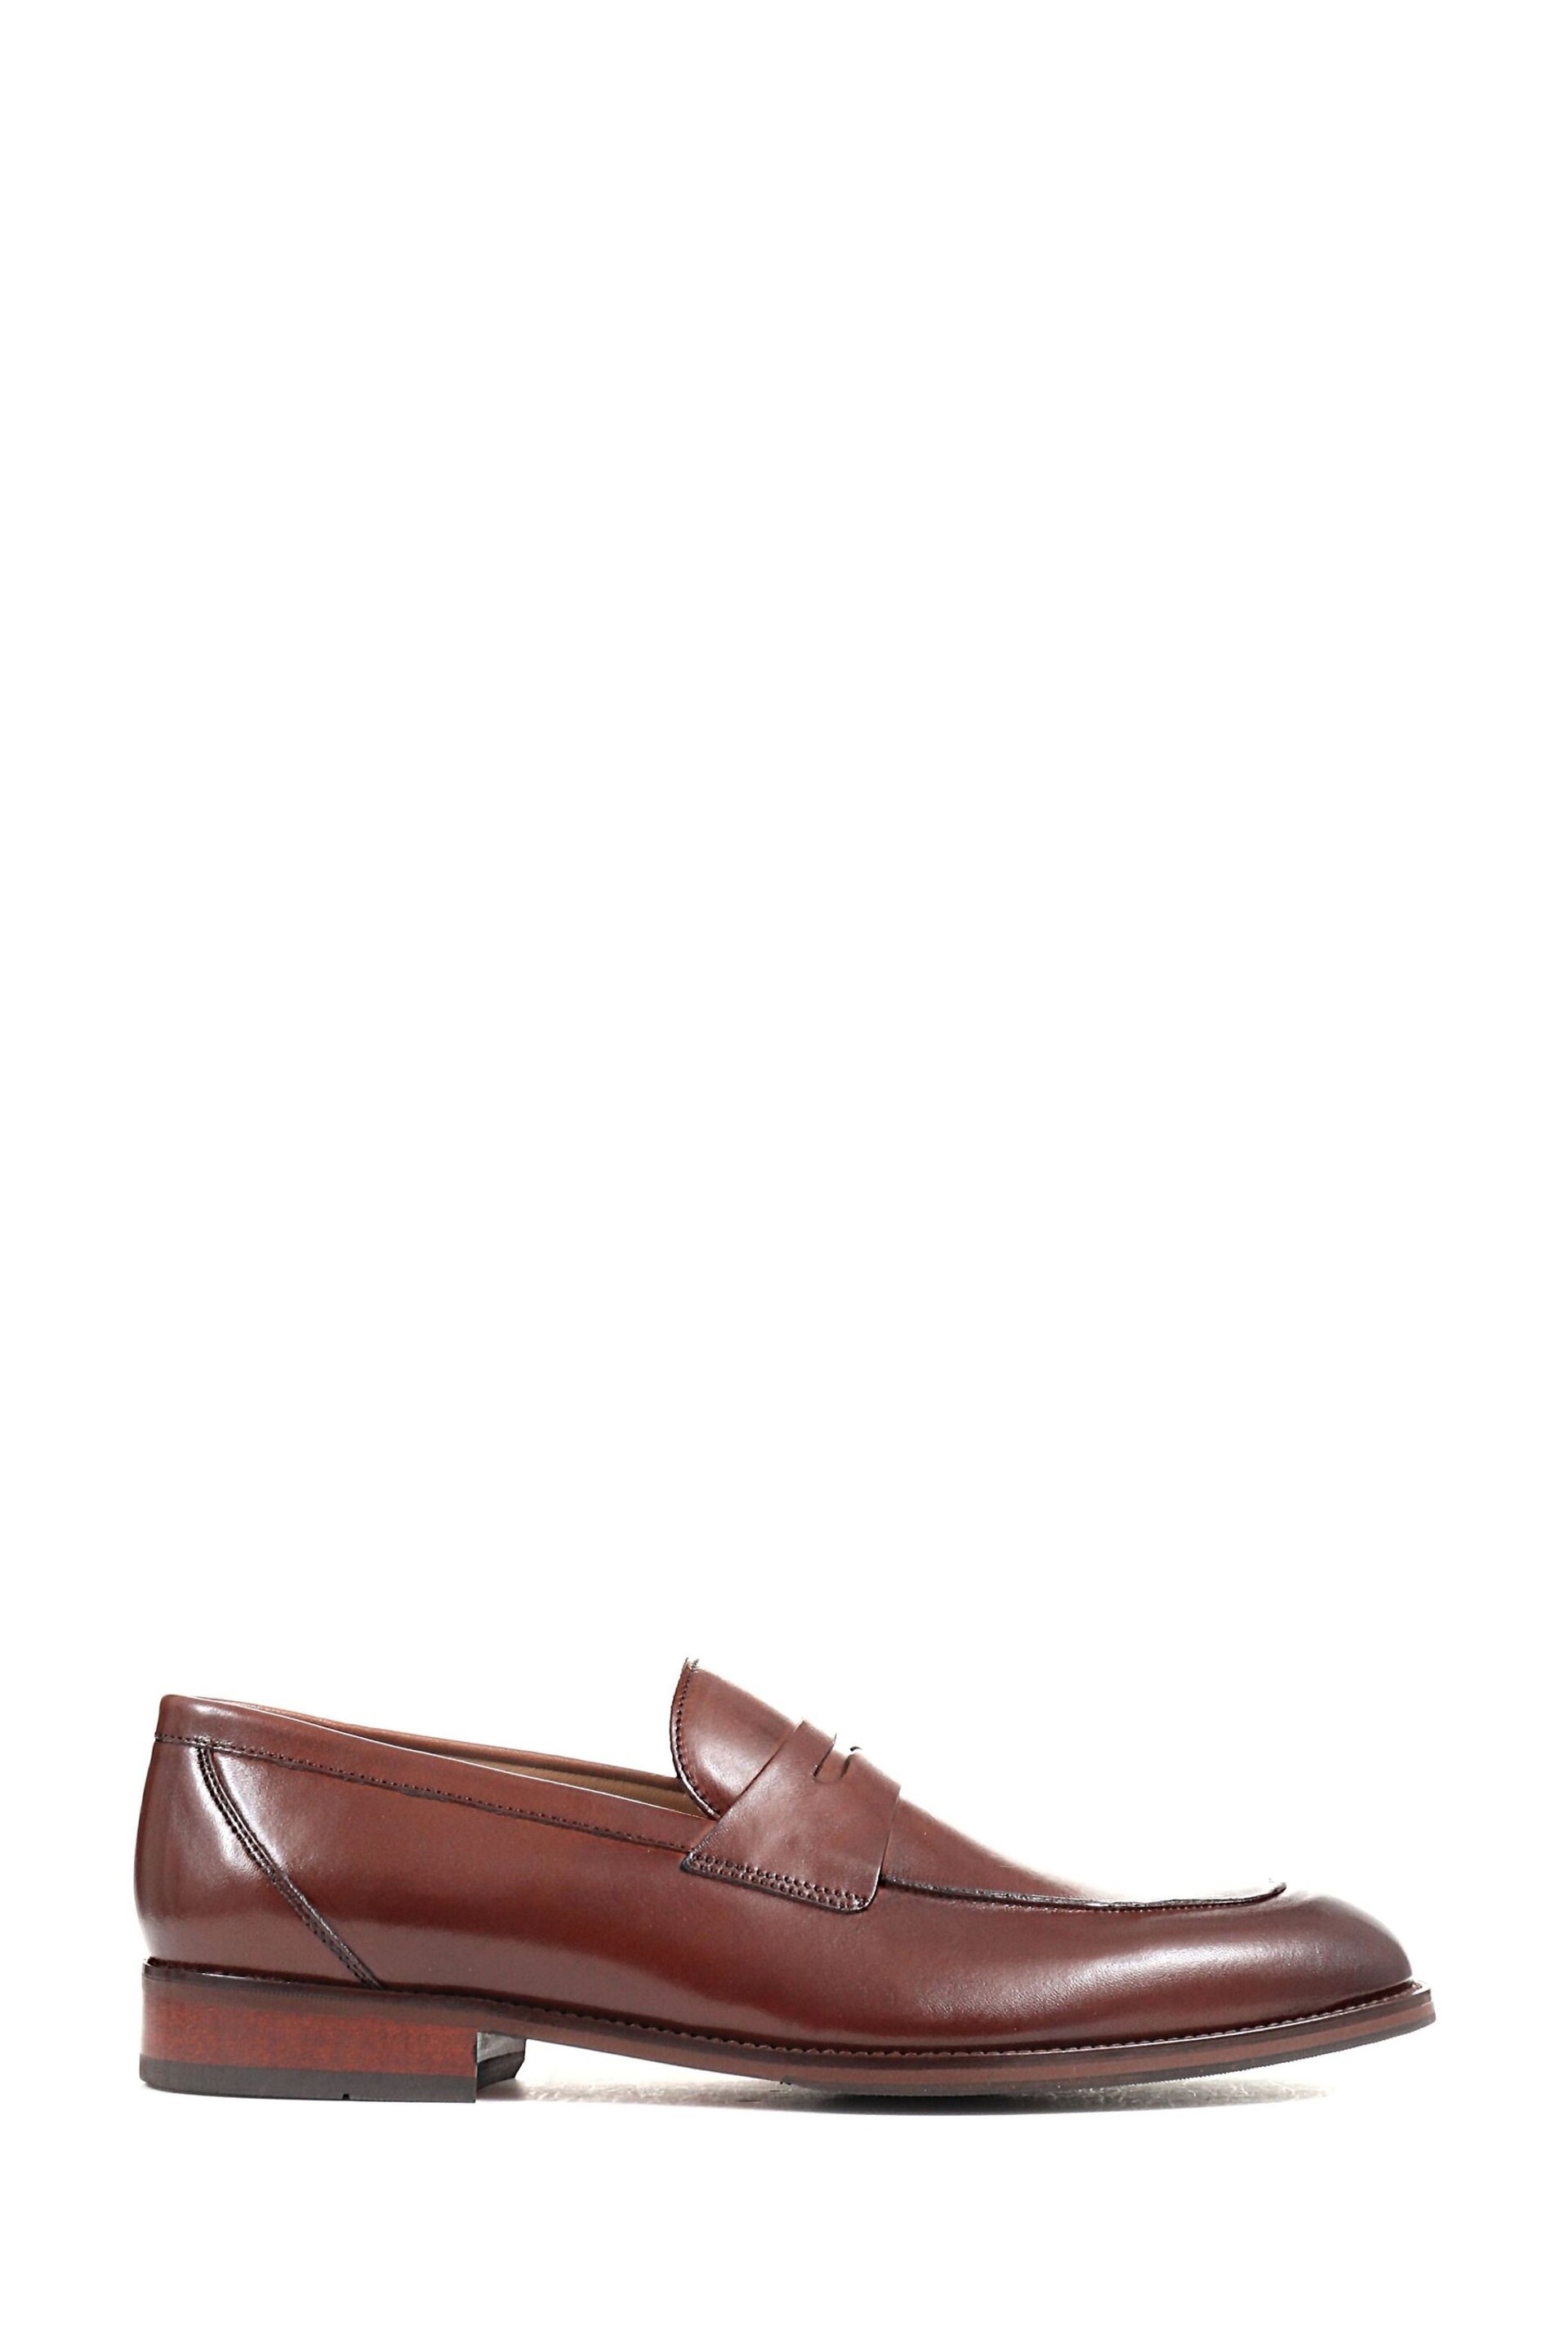 Jones Bootmaker Leather Penny Loafers - Image 1 of 5